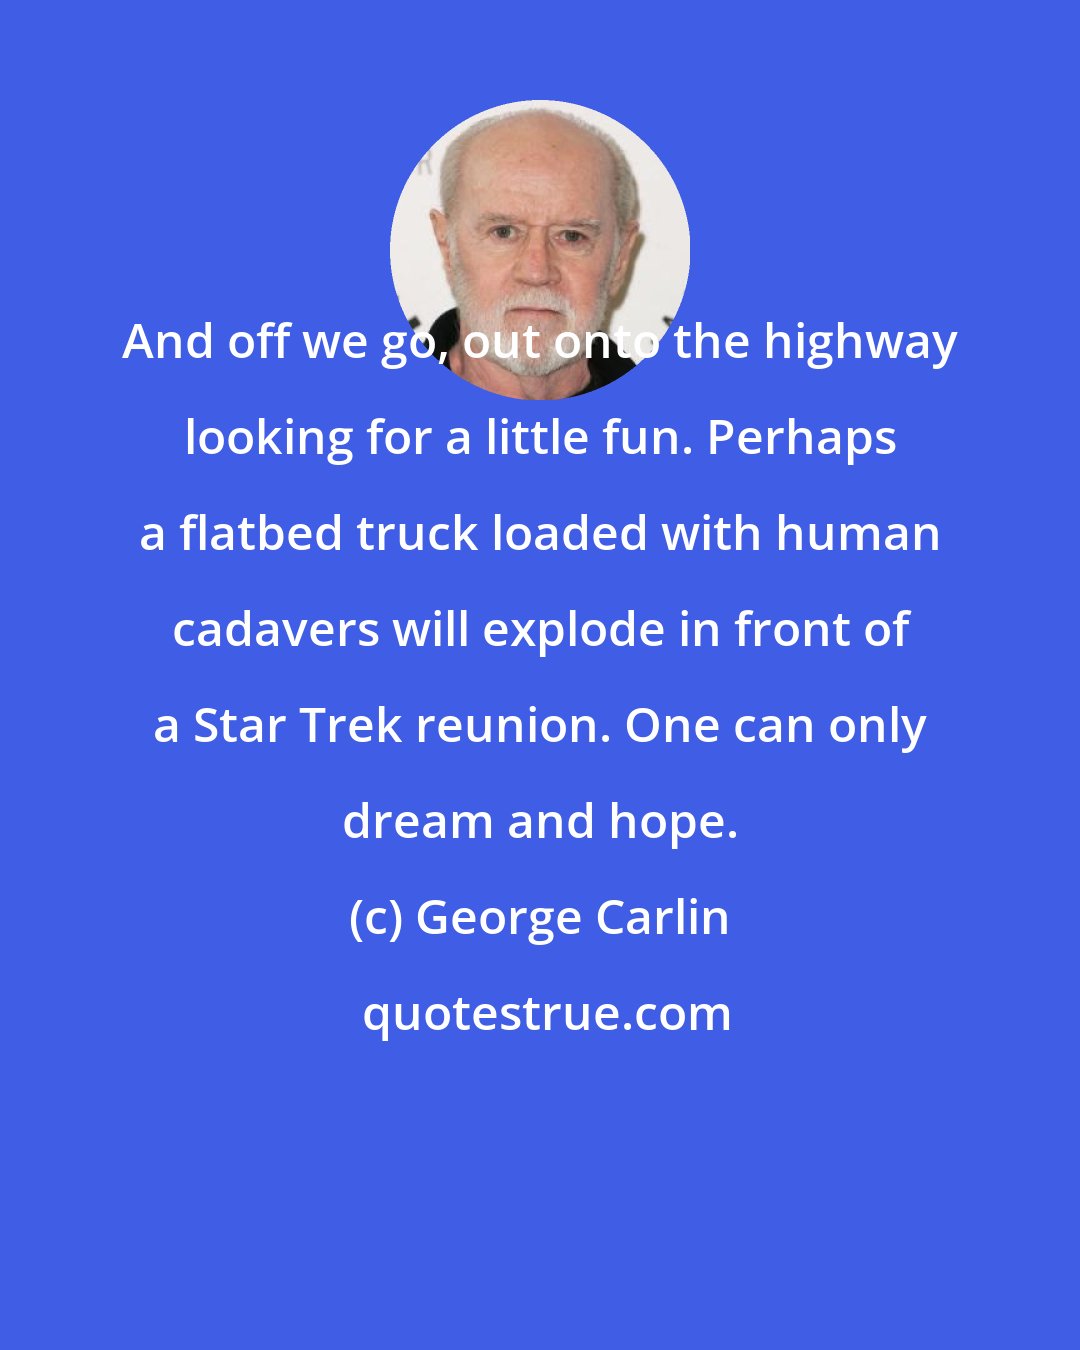 George Carlin: And off we go, out onto the highway looking for a little fun. Perhaps a flatbed truck loaded with human cadavers will explode in front of a Star Trek reunion. One can only dream and hope.